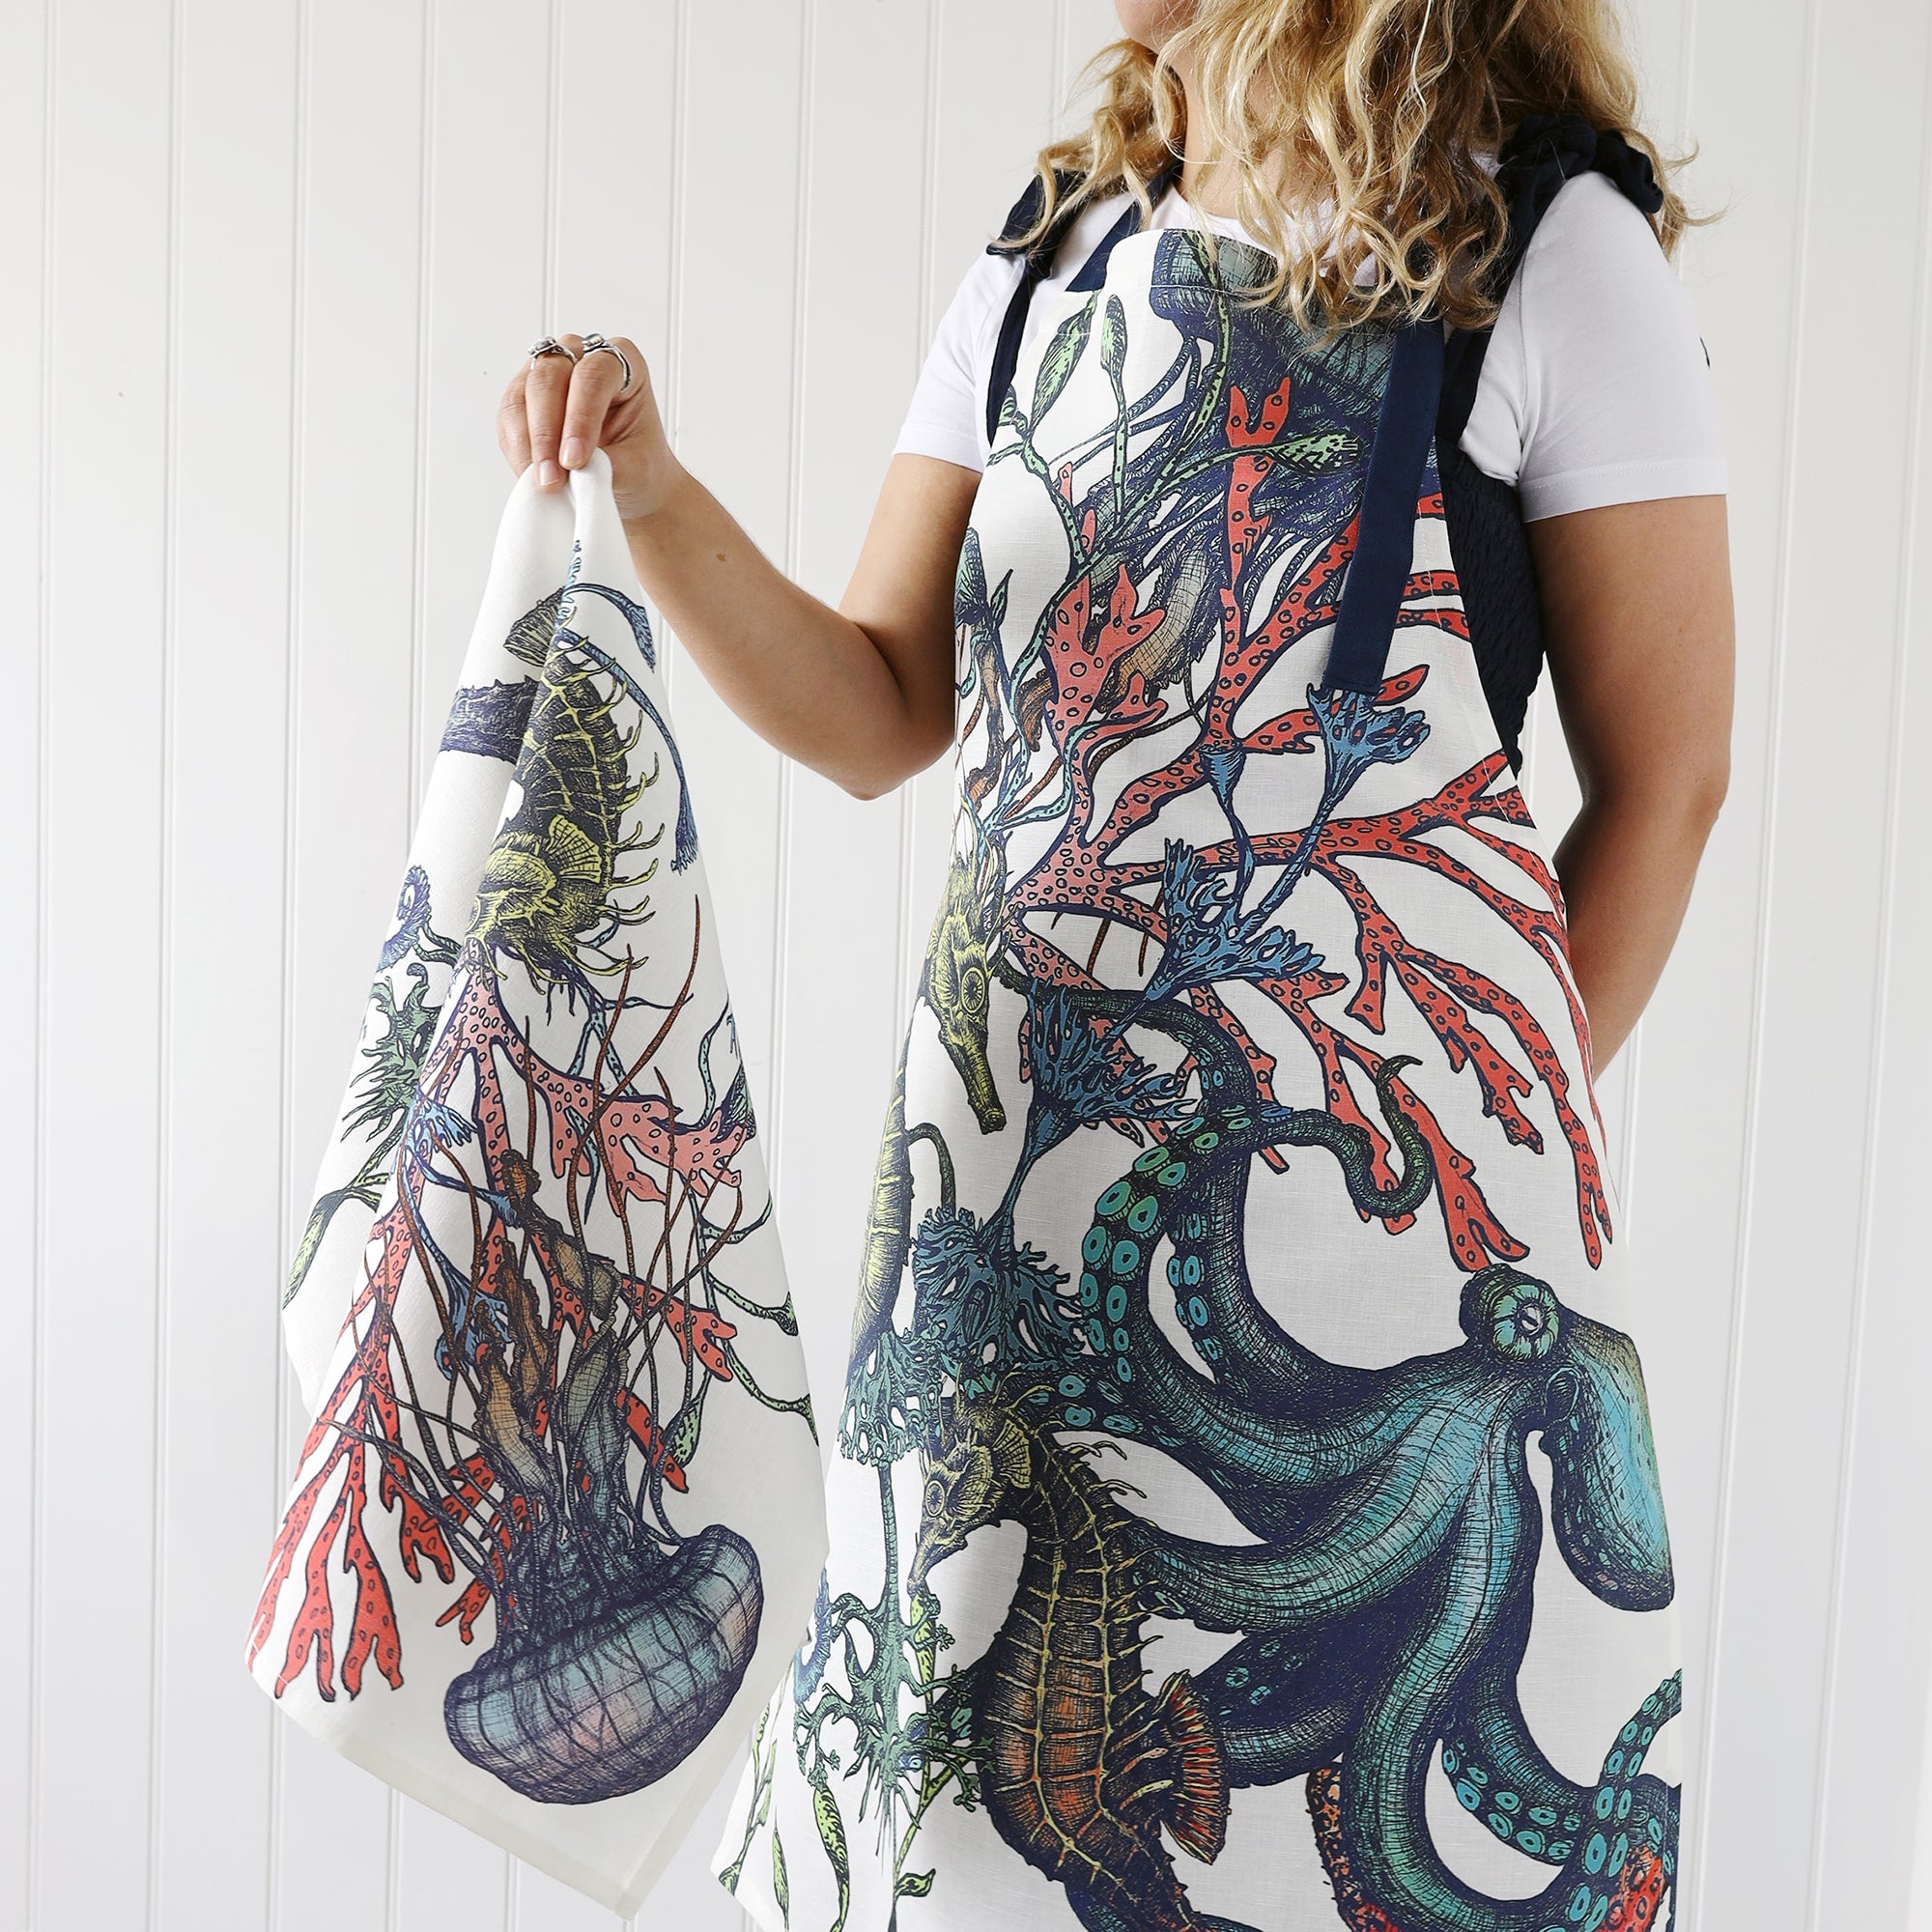 Model wearing our Reef Apron holding a matching tea towel